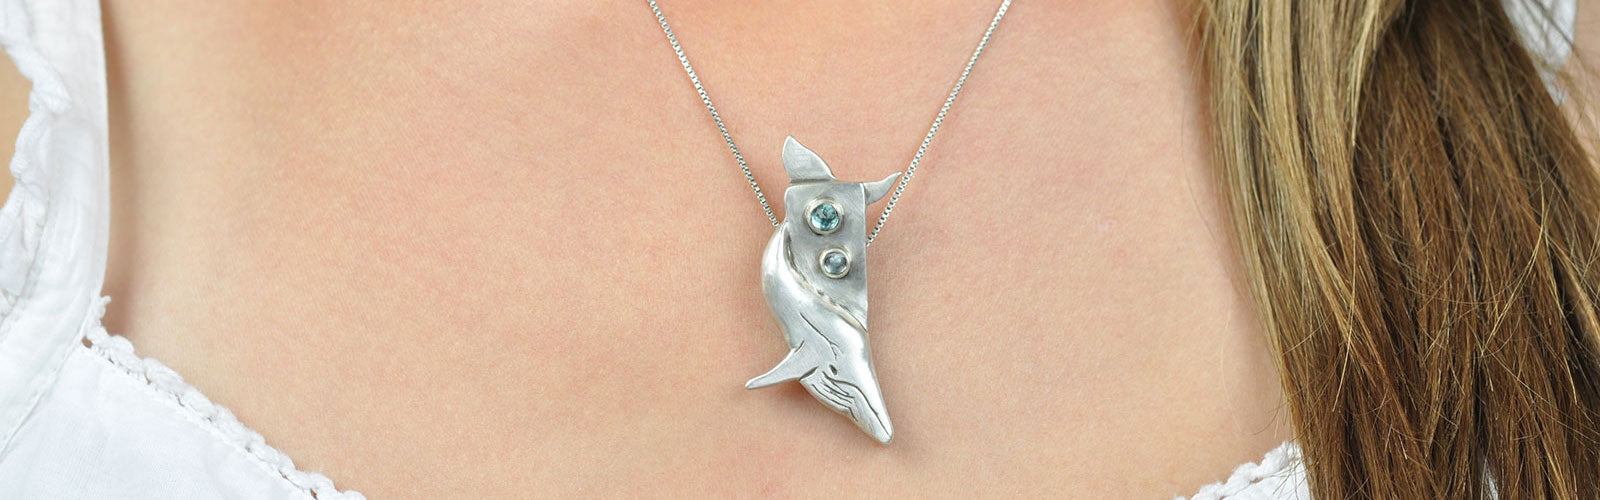 ­The Making of a Whale Pendant